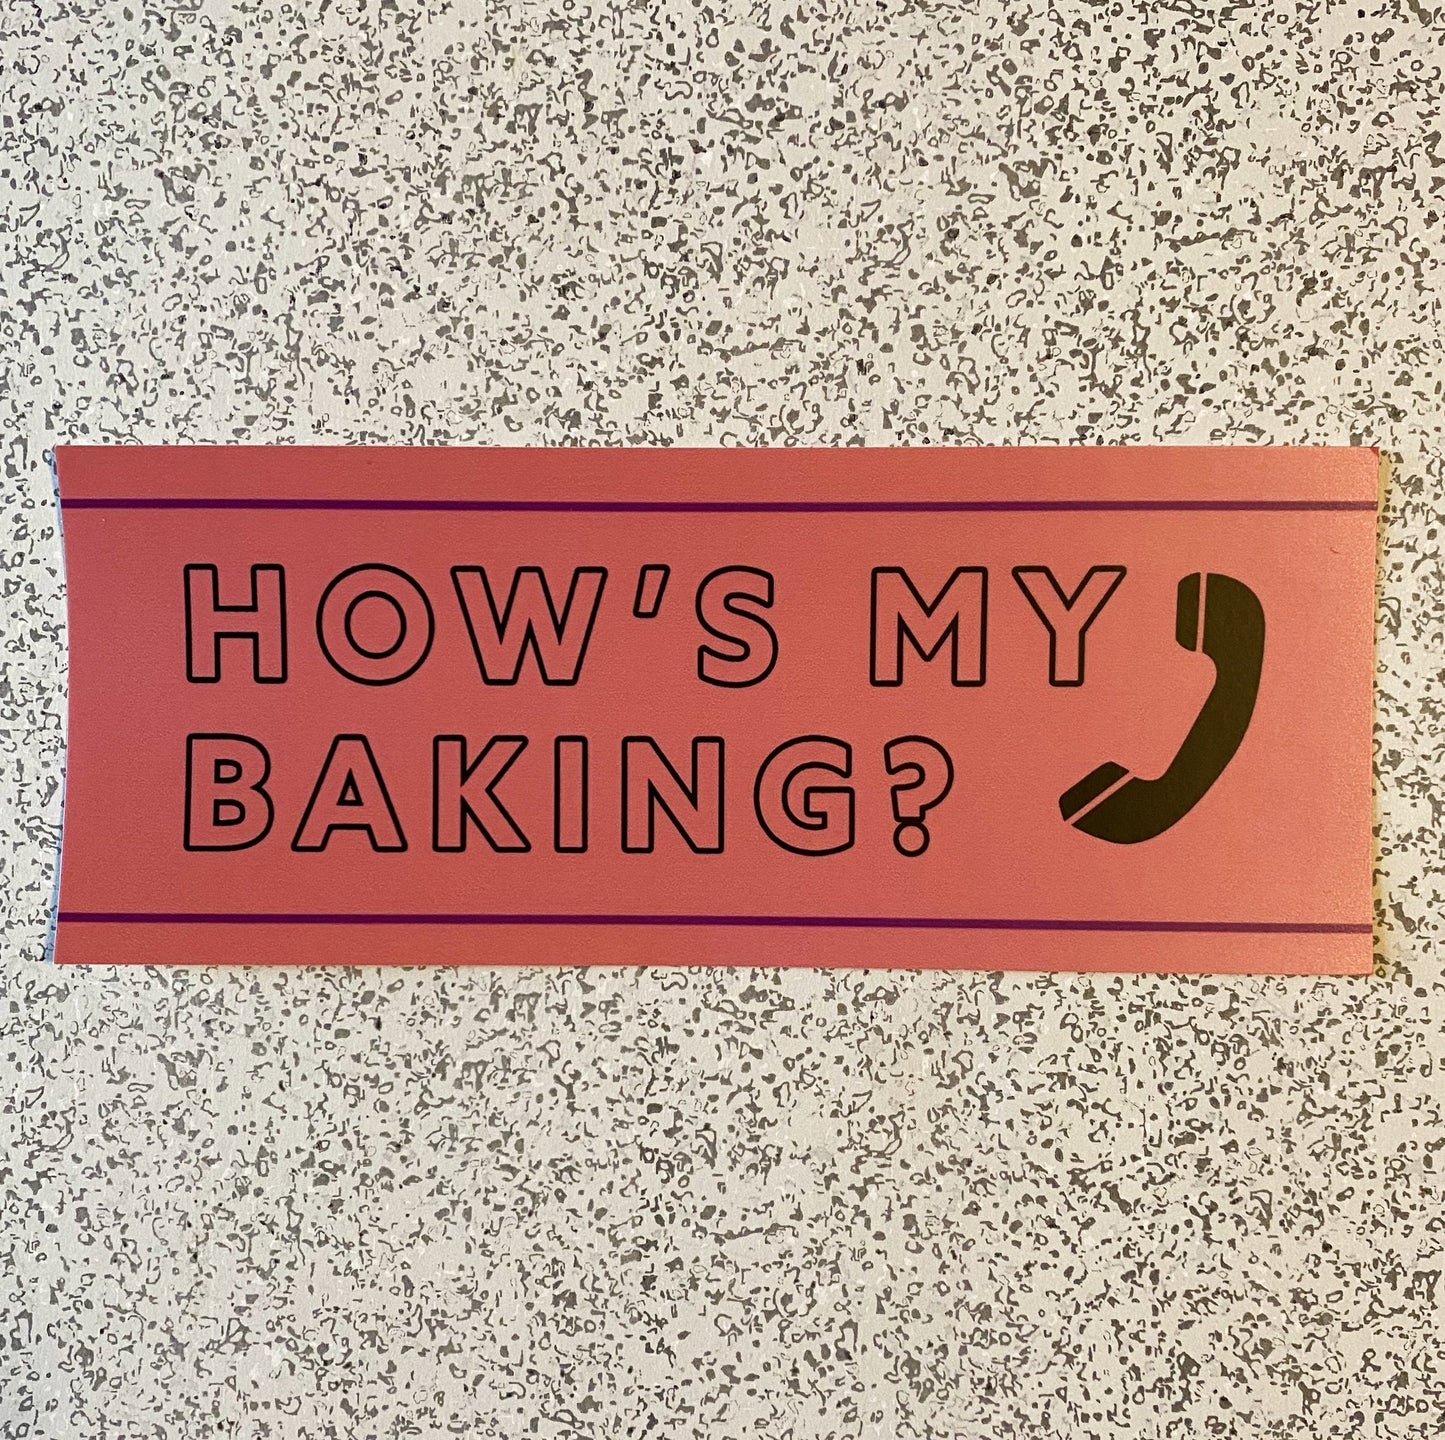 A funny bumper sticker with the words "How's my baking?" in black block letters and a phone icon